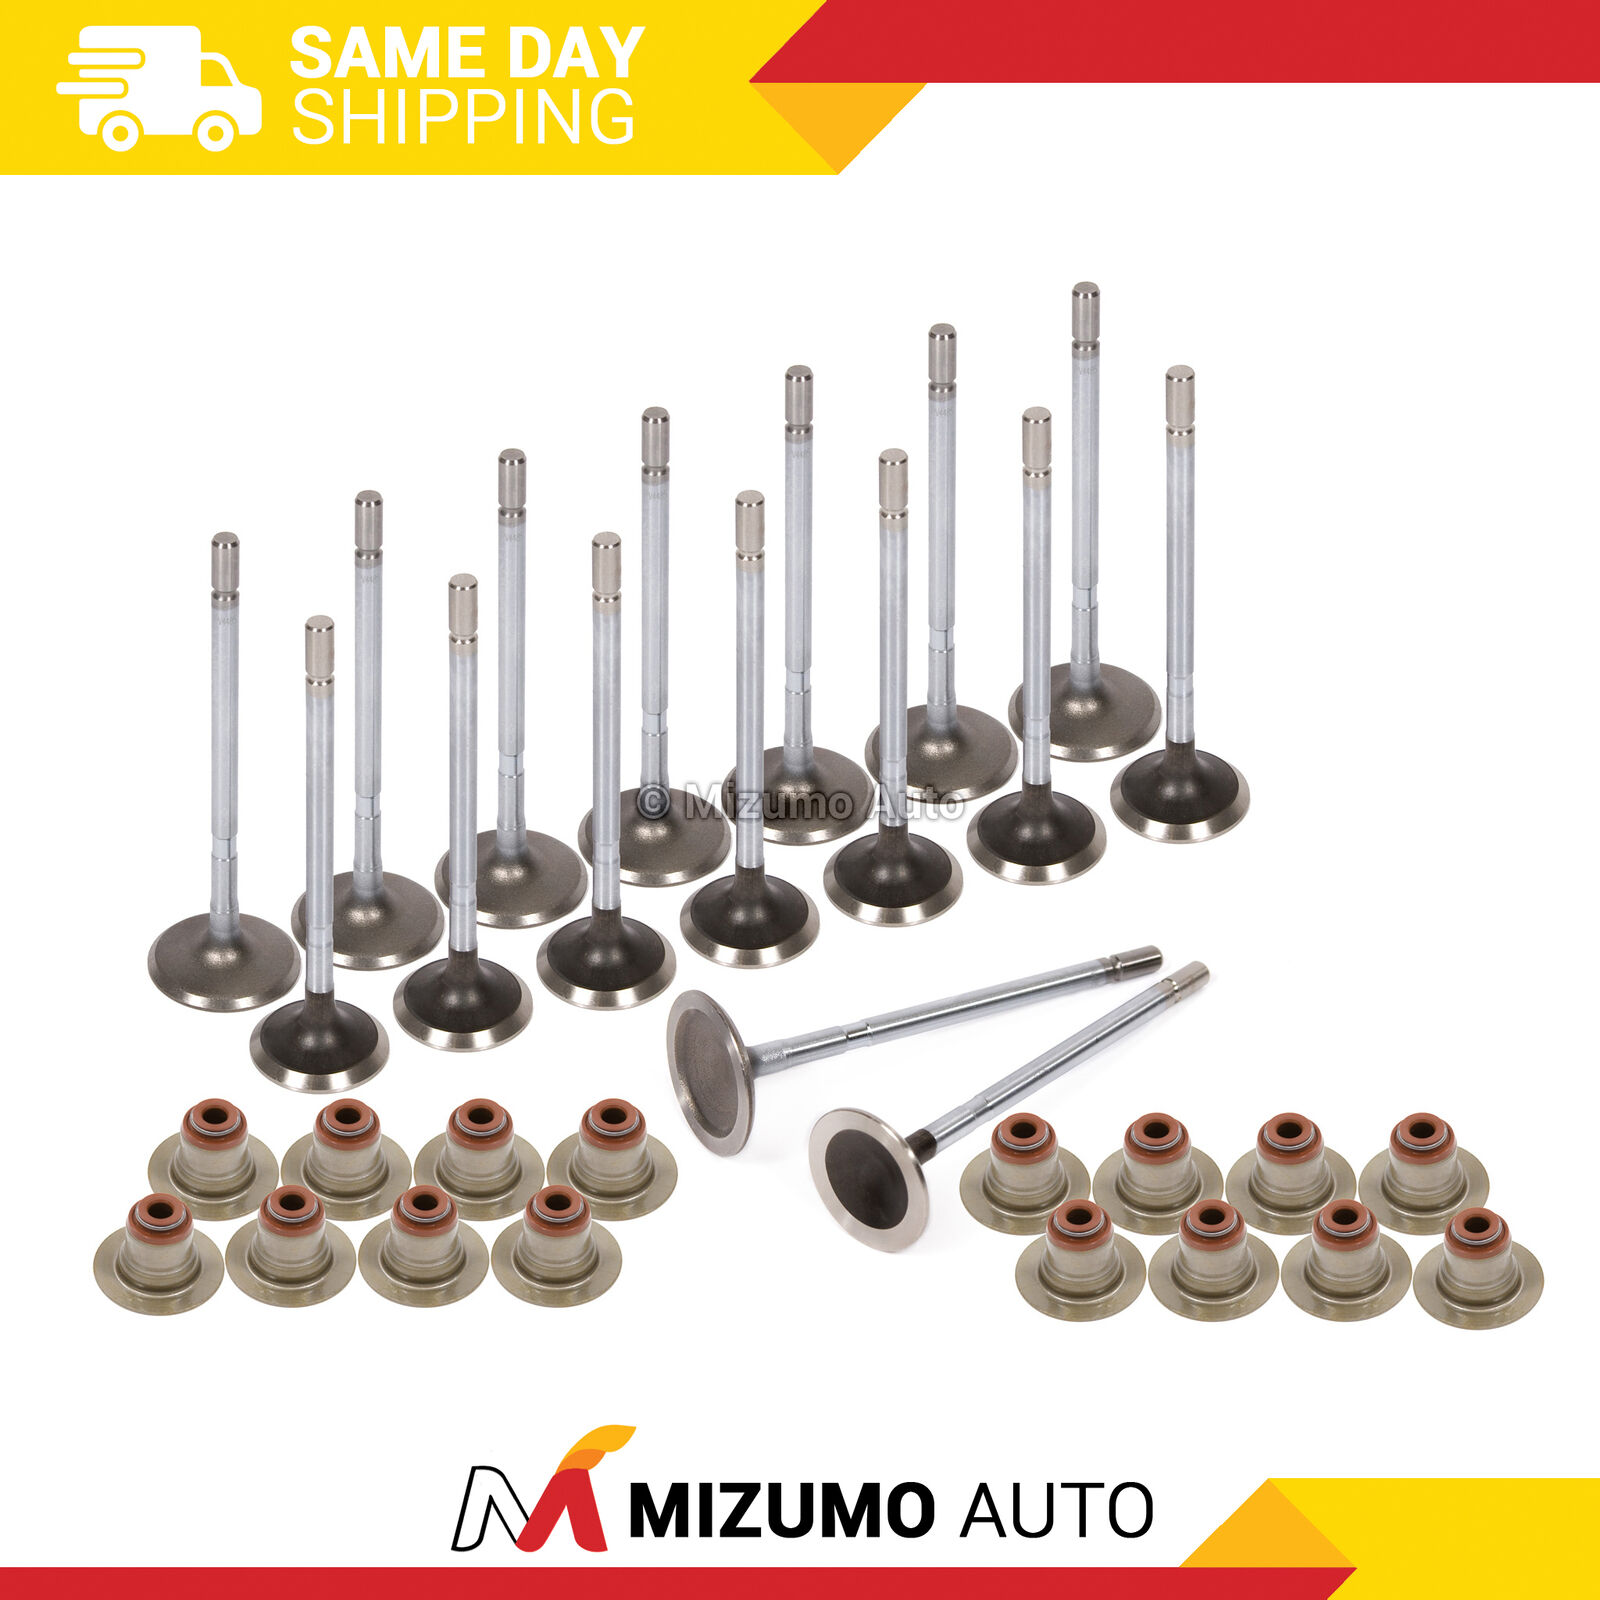 Intake Exhaust Valves w/ Seals Fit Dodge Mitsubishi Eagle Plymouth 2.0 2.4 DOHC